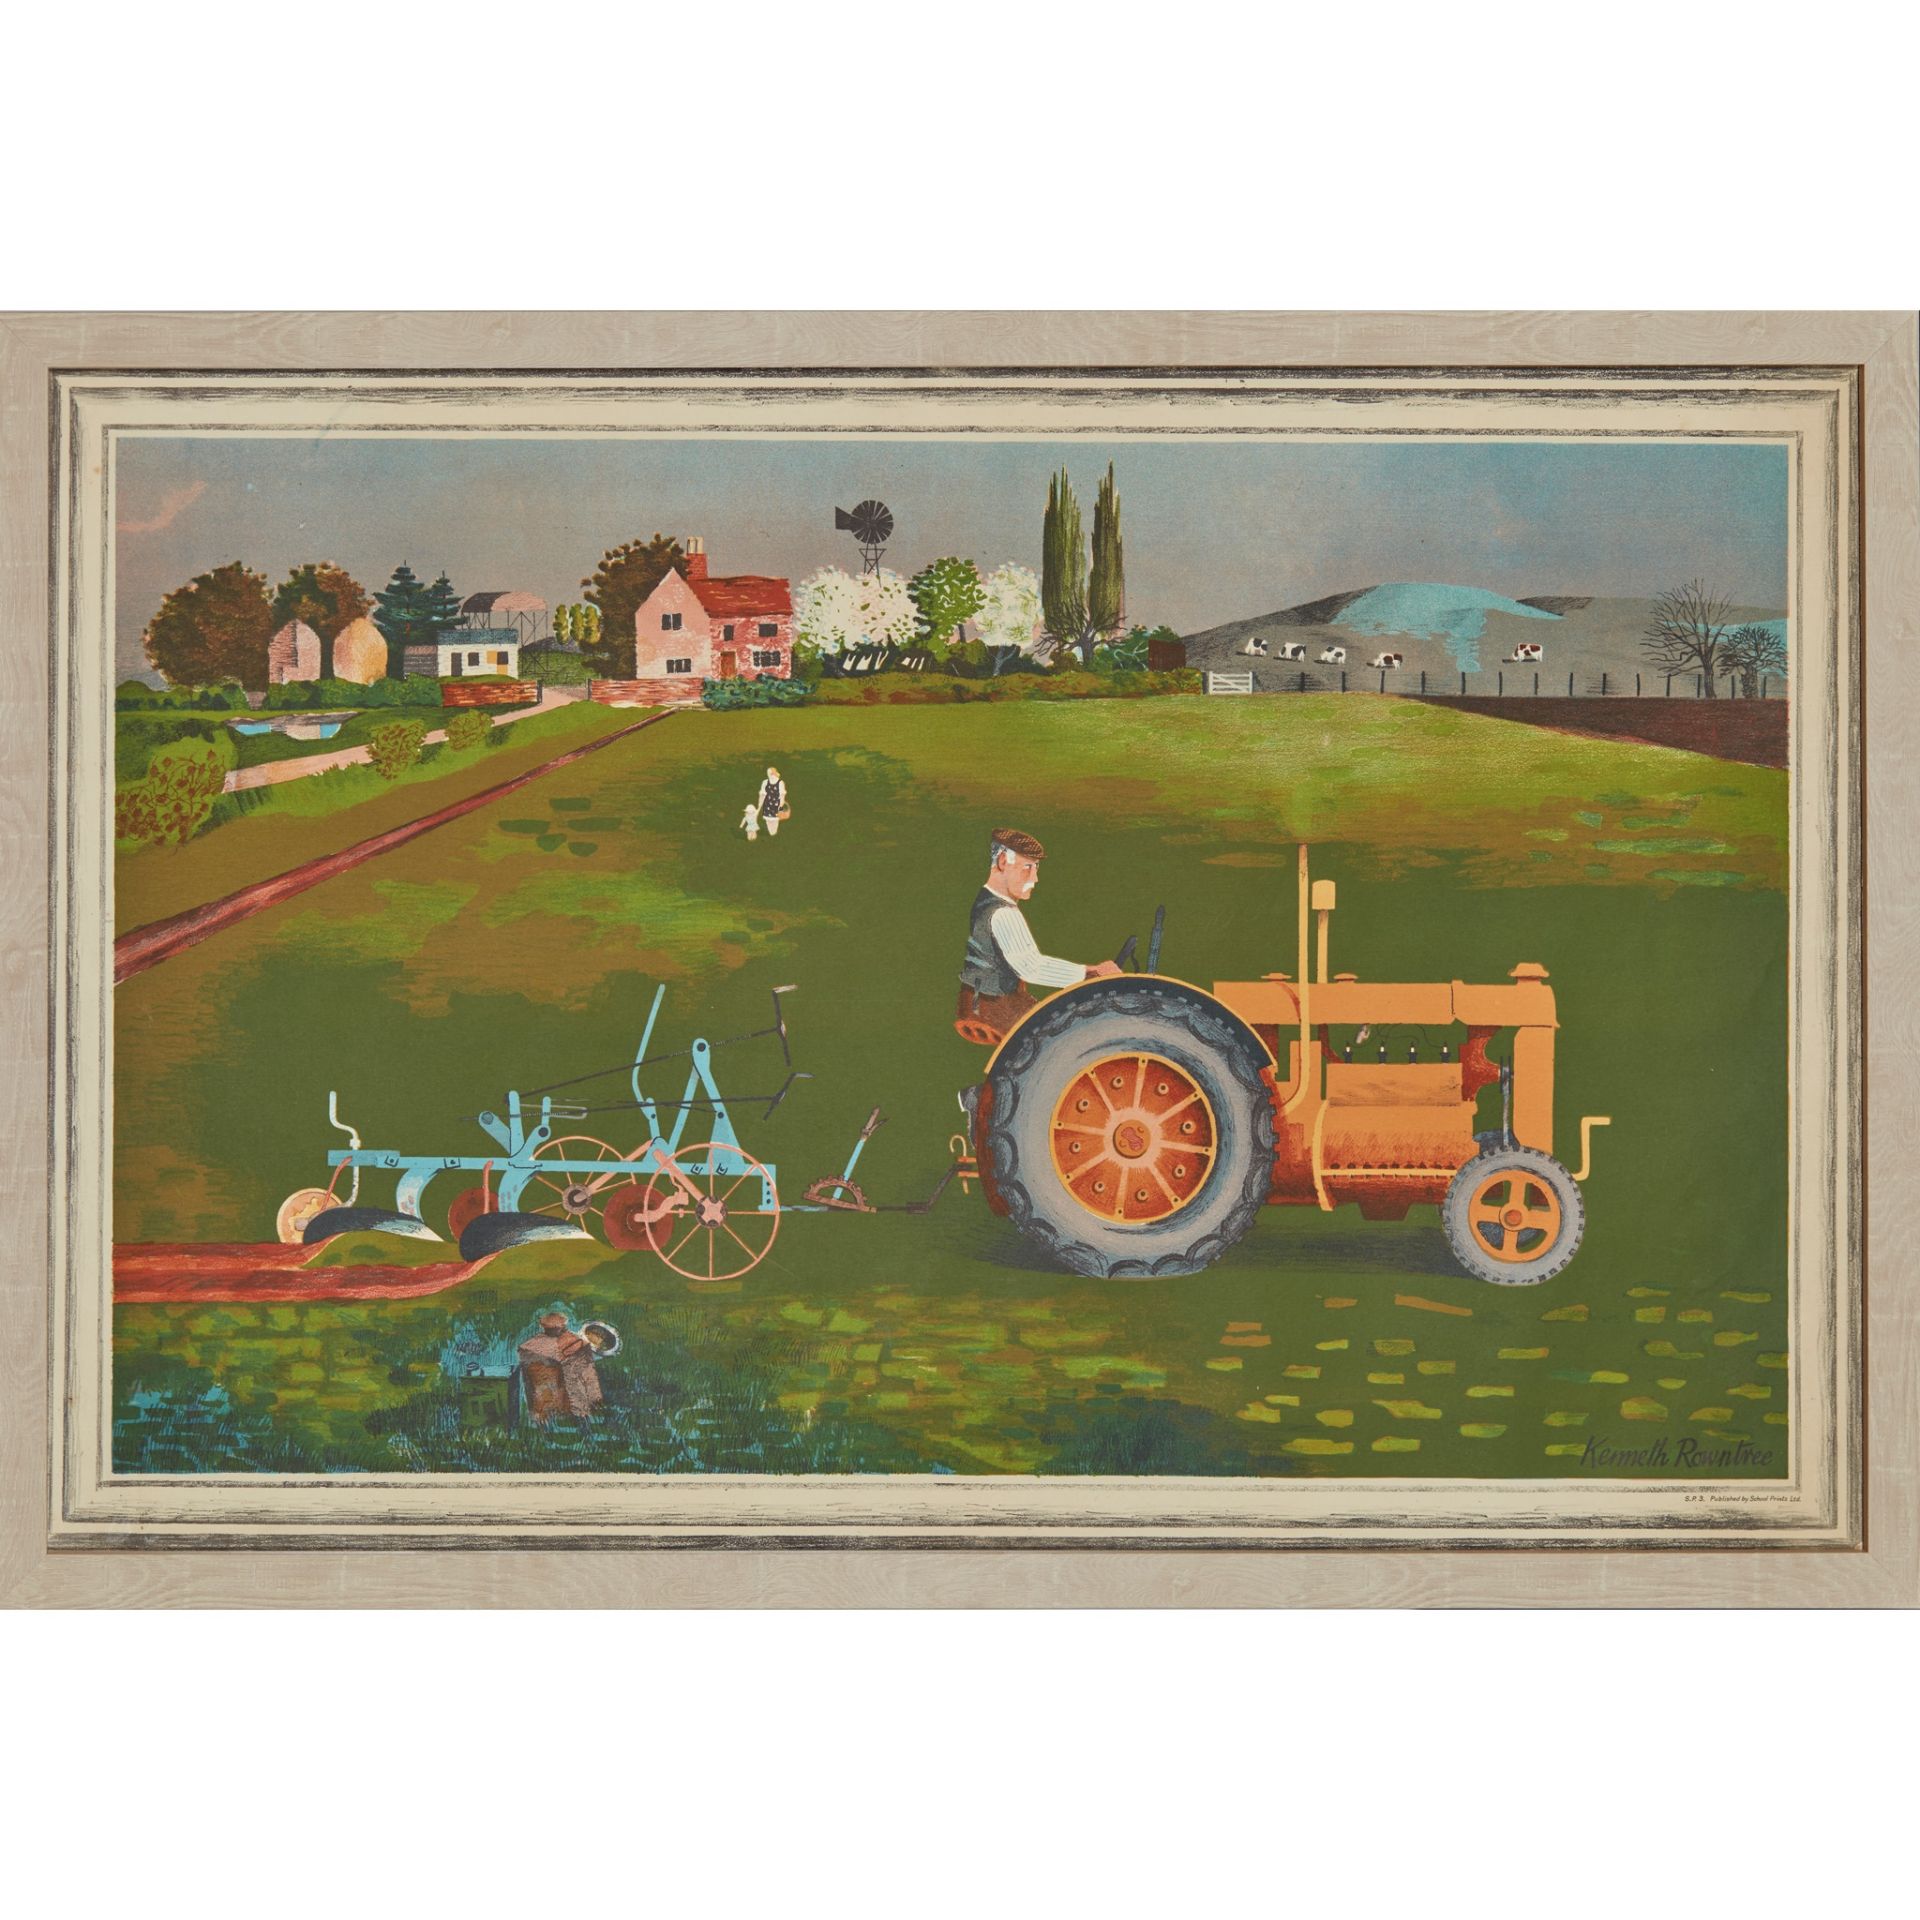 KENNETH ROWNTREE (1915-1997) FOR SCHOOL PRINTS LTD. TRACTOR IN LANDSCAPE, 1945 - Image 5 of 6